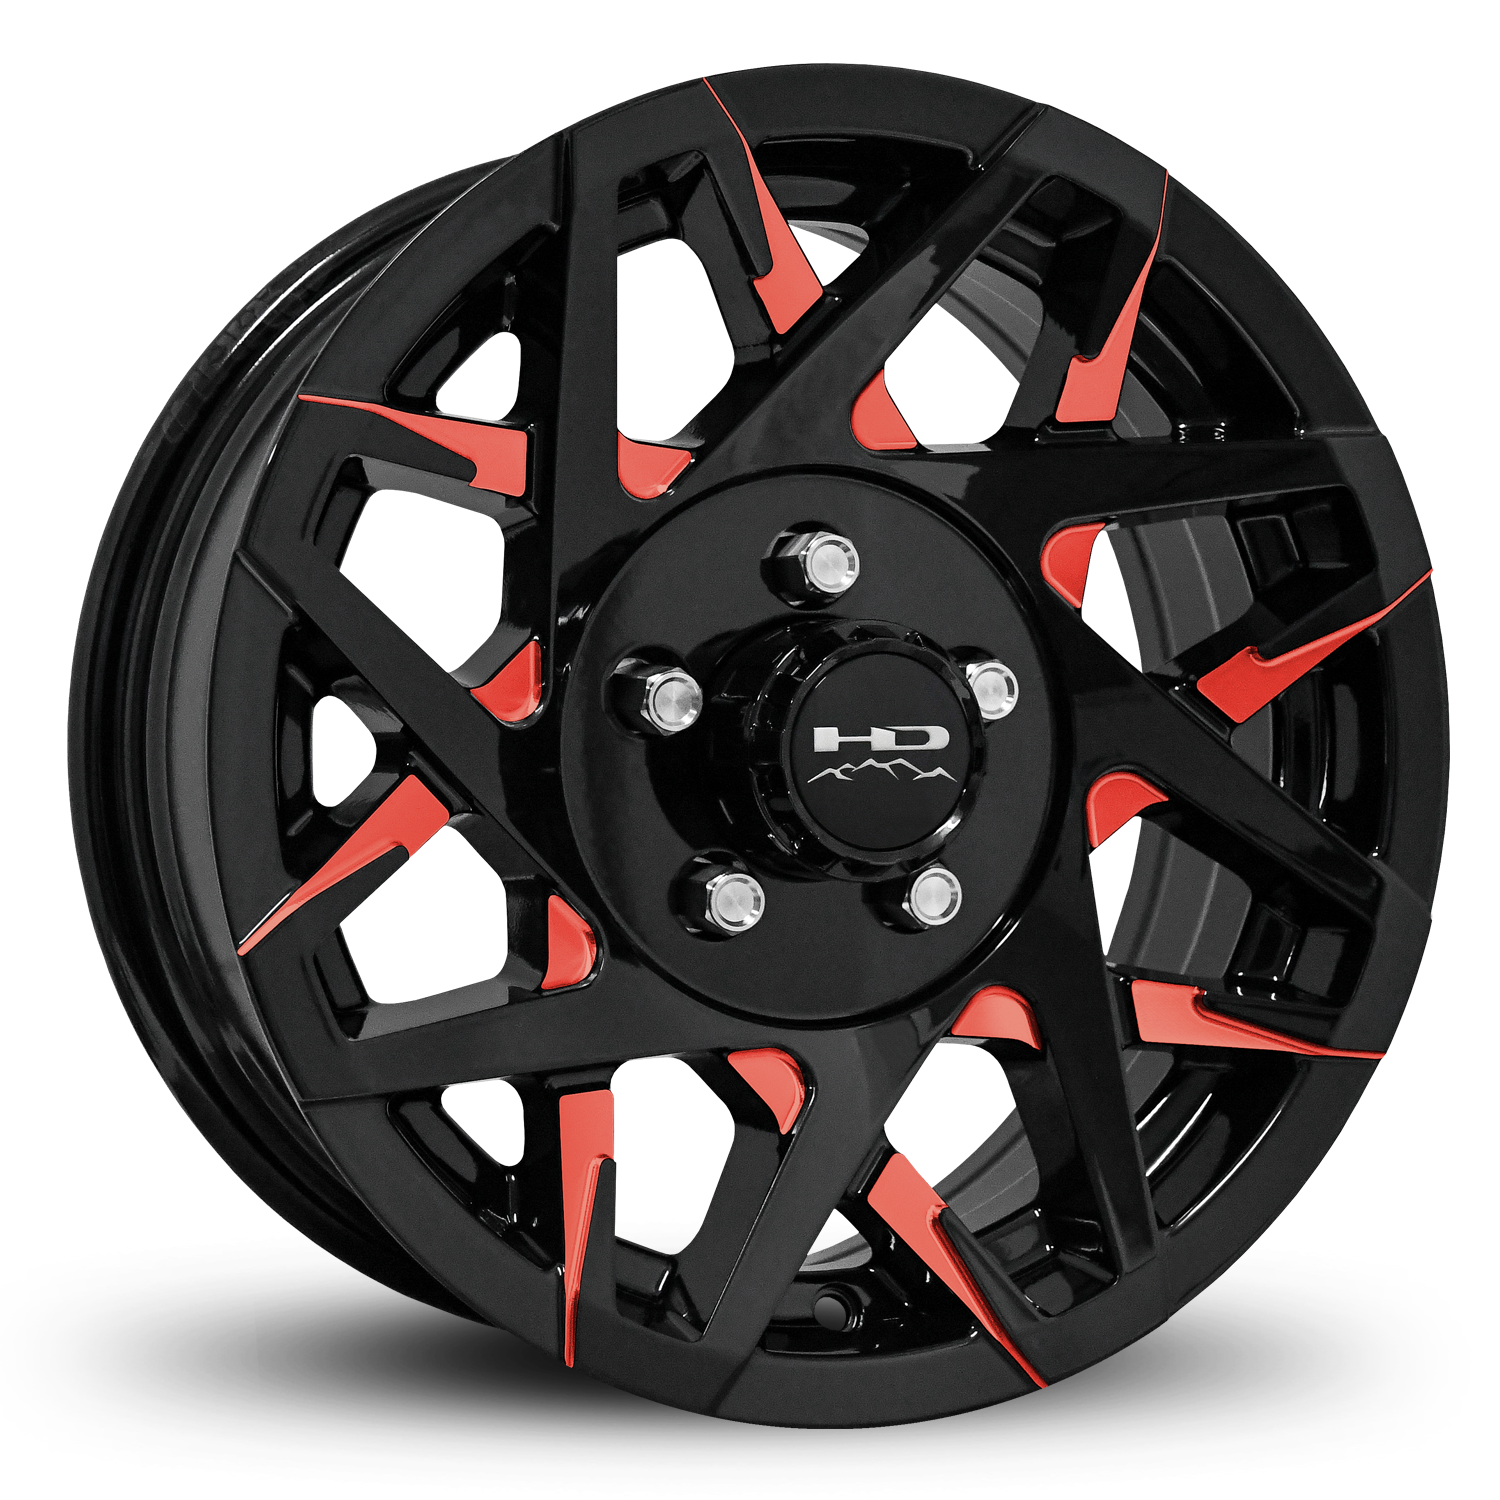 HD Off-Road Canyon Custom Trailer Wheel Rims in 15x6.0  15x6 Gloss Black CNC Milled Face with Blue Clear Coat Spokes with Center Cap & Logo fits 5x4.50 / 5x114.3 Axle Boat, Car, RV, Travel, Concession, Horse, Utility, Lawn & Garden, & Landscaping.